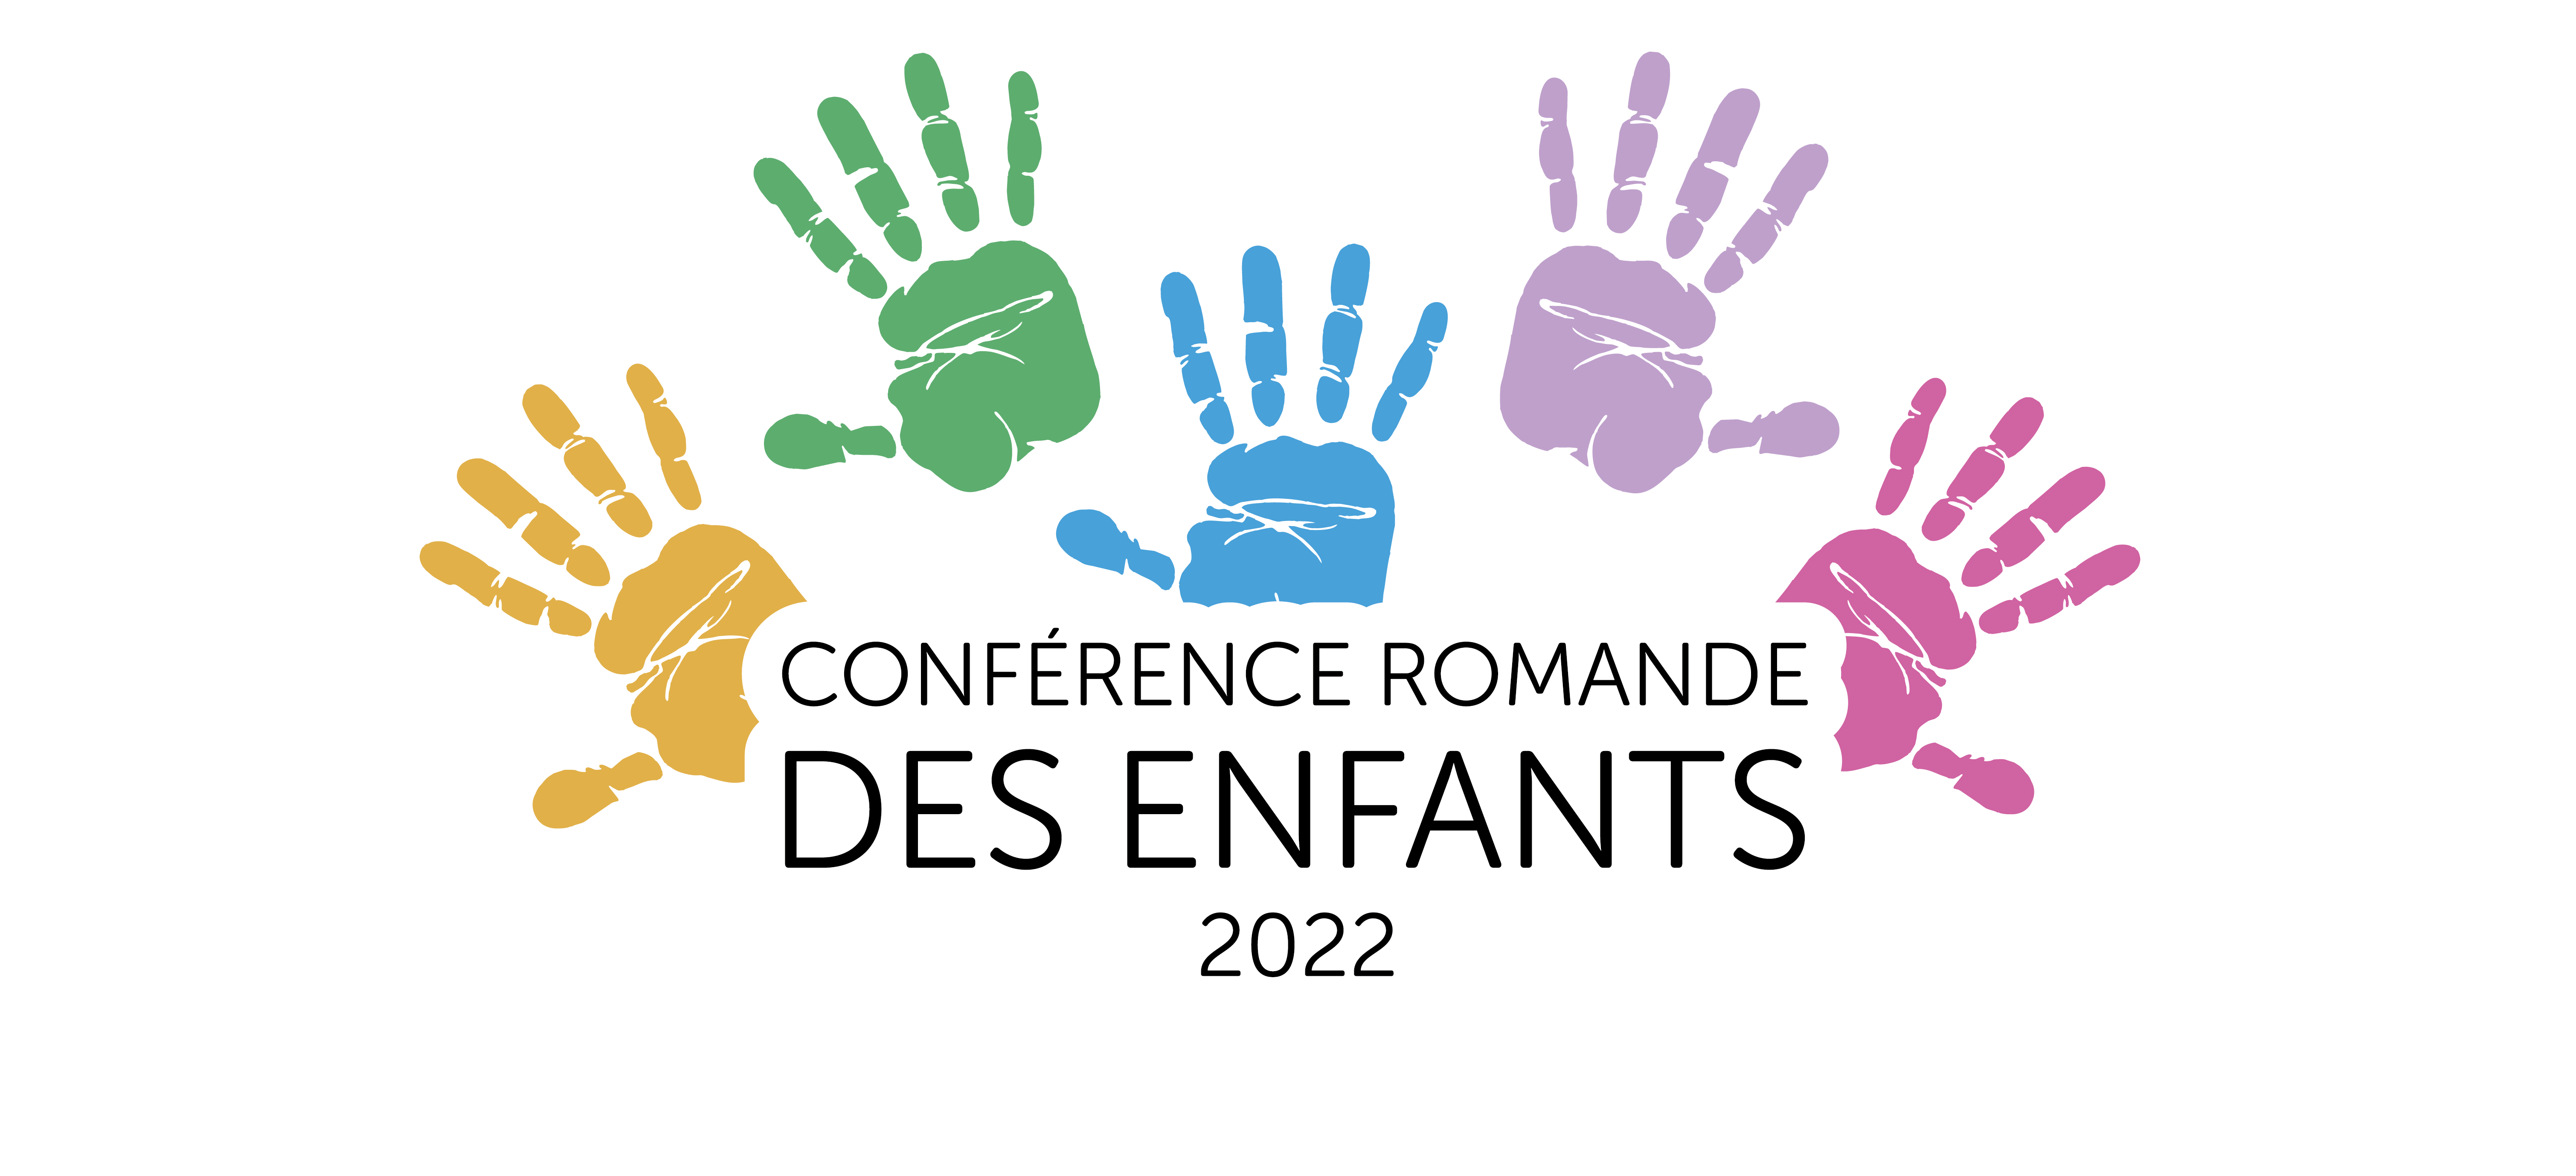 You are currently viewing Conférence Romande des Enfants 2022